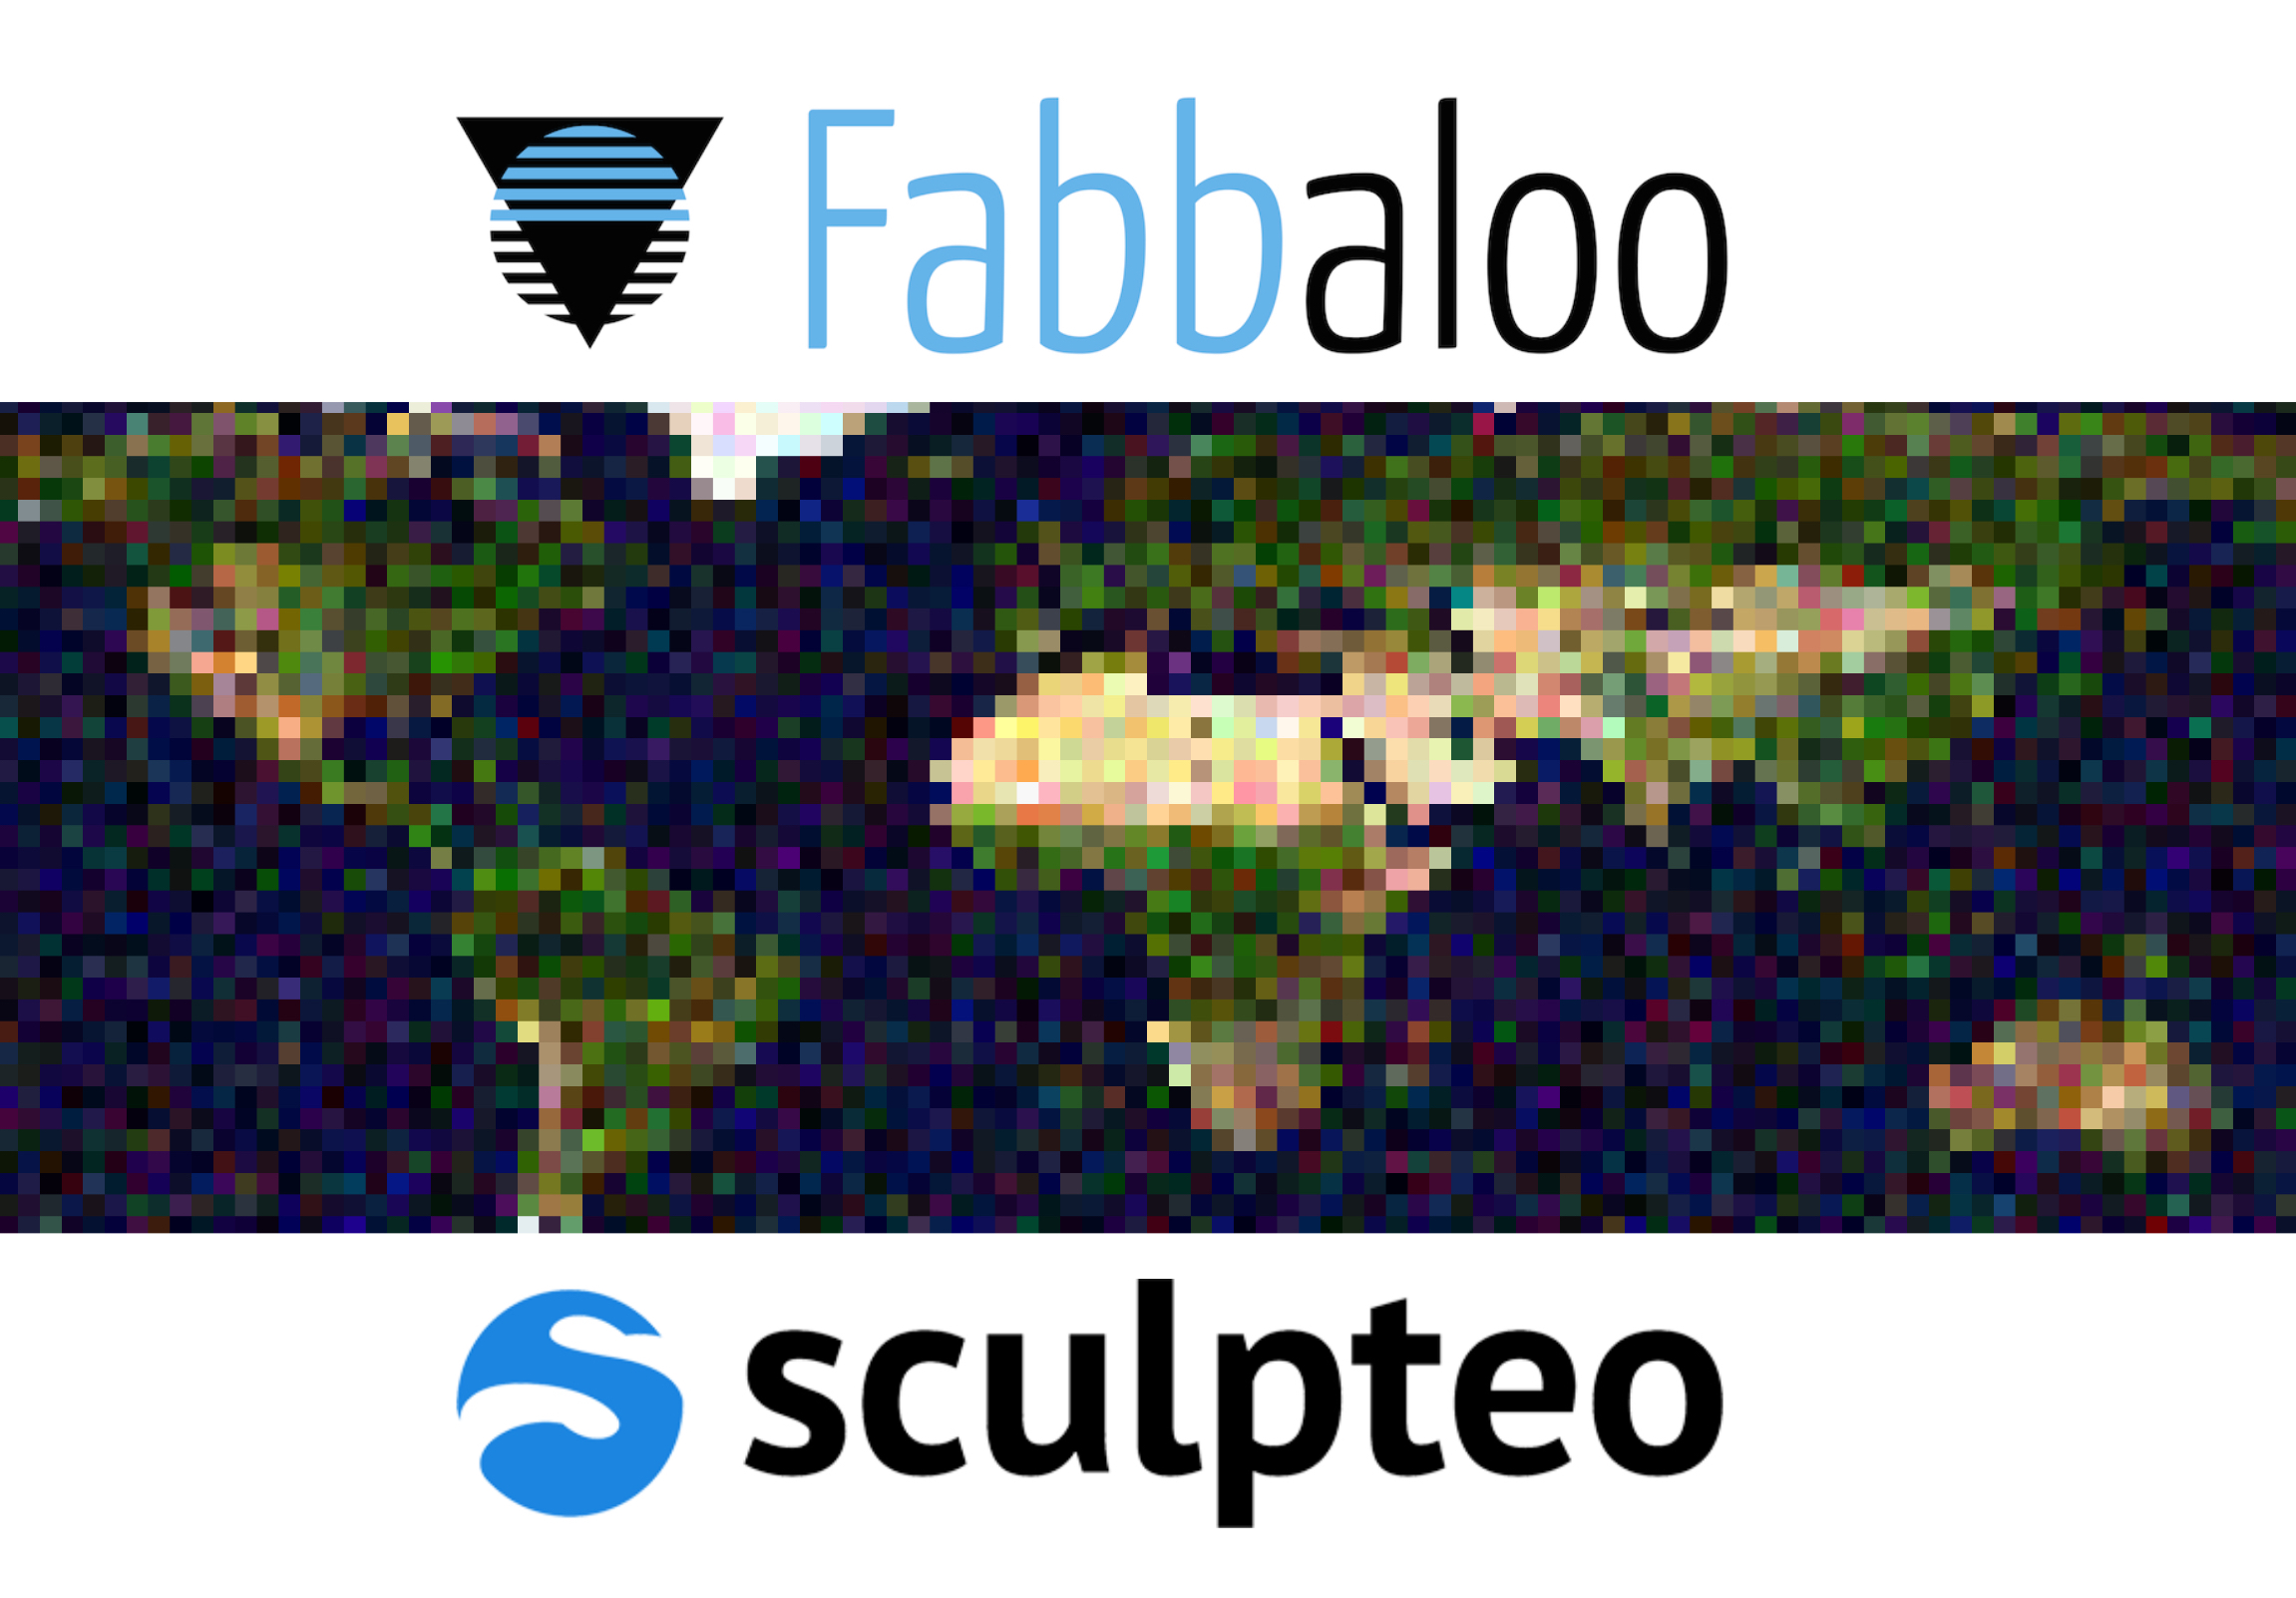  Sculpteo is powering this year's annual Fabbaloo reader survey 